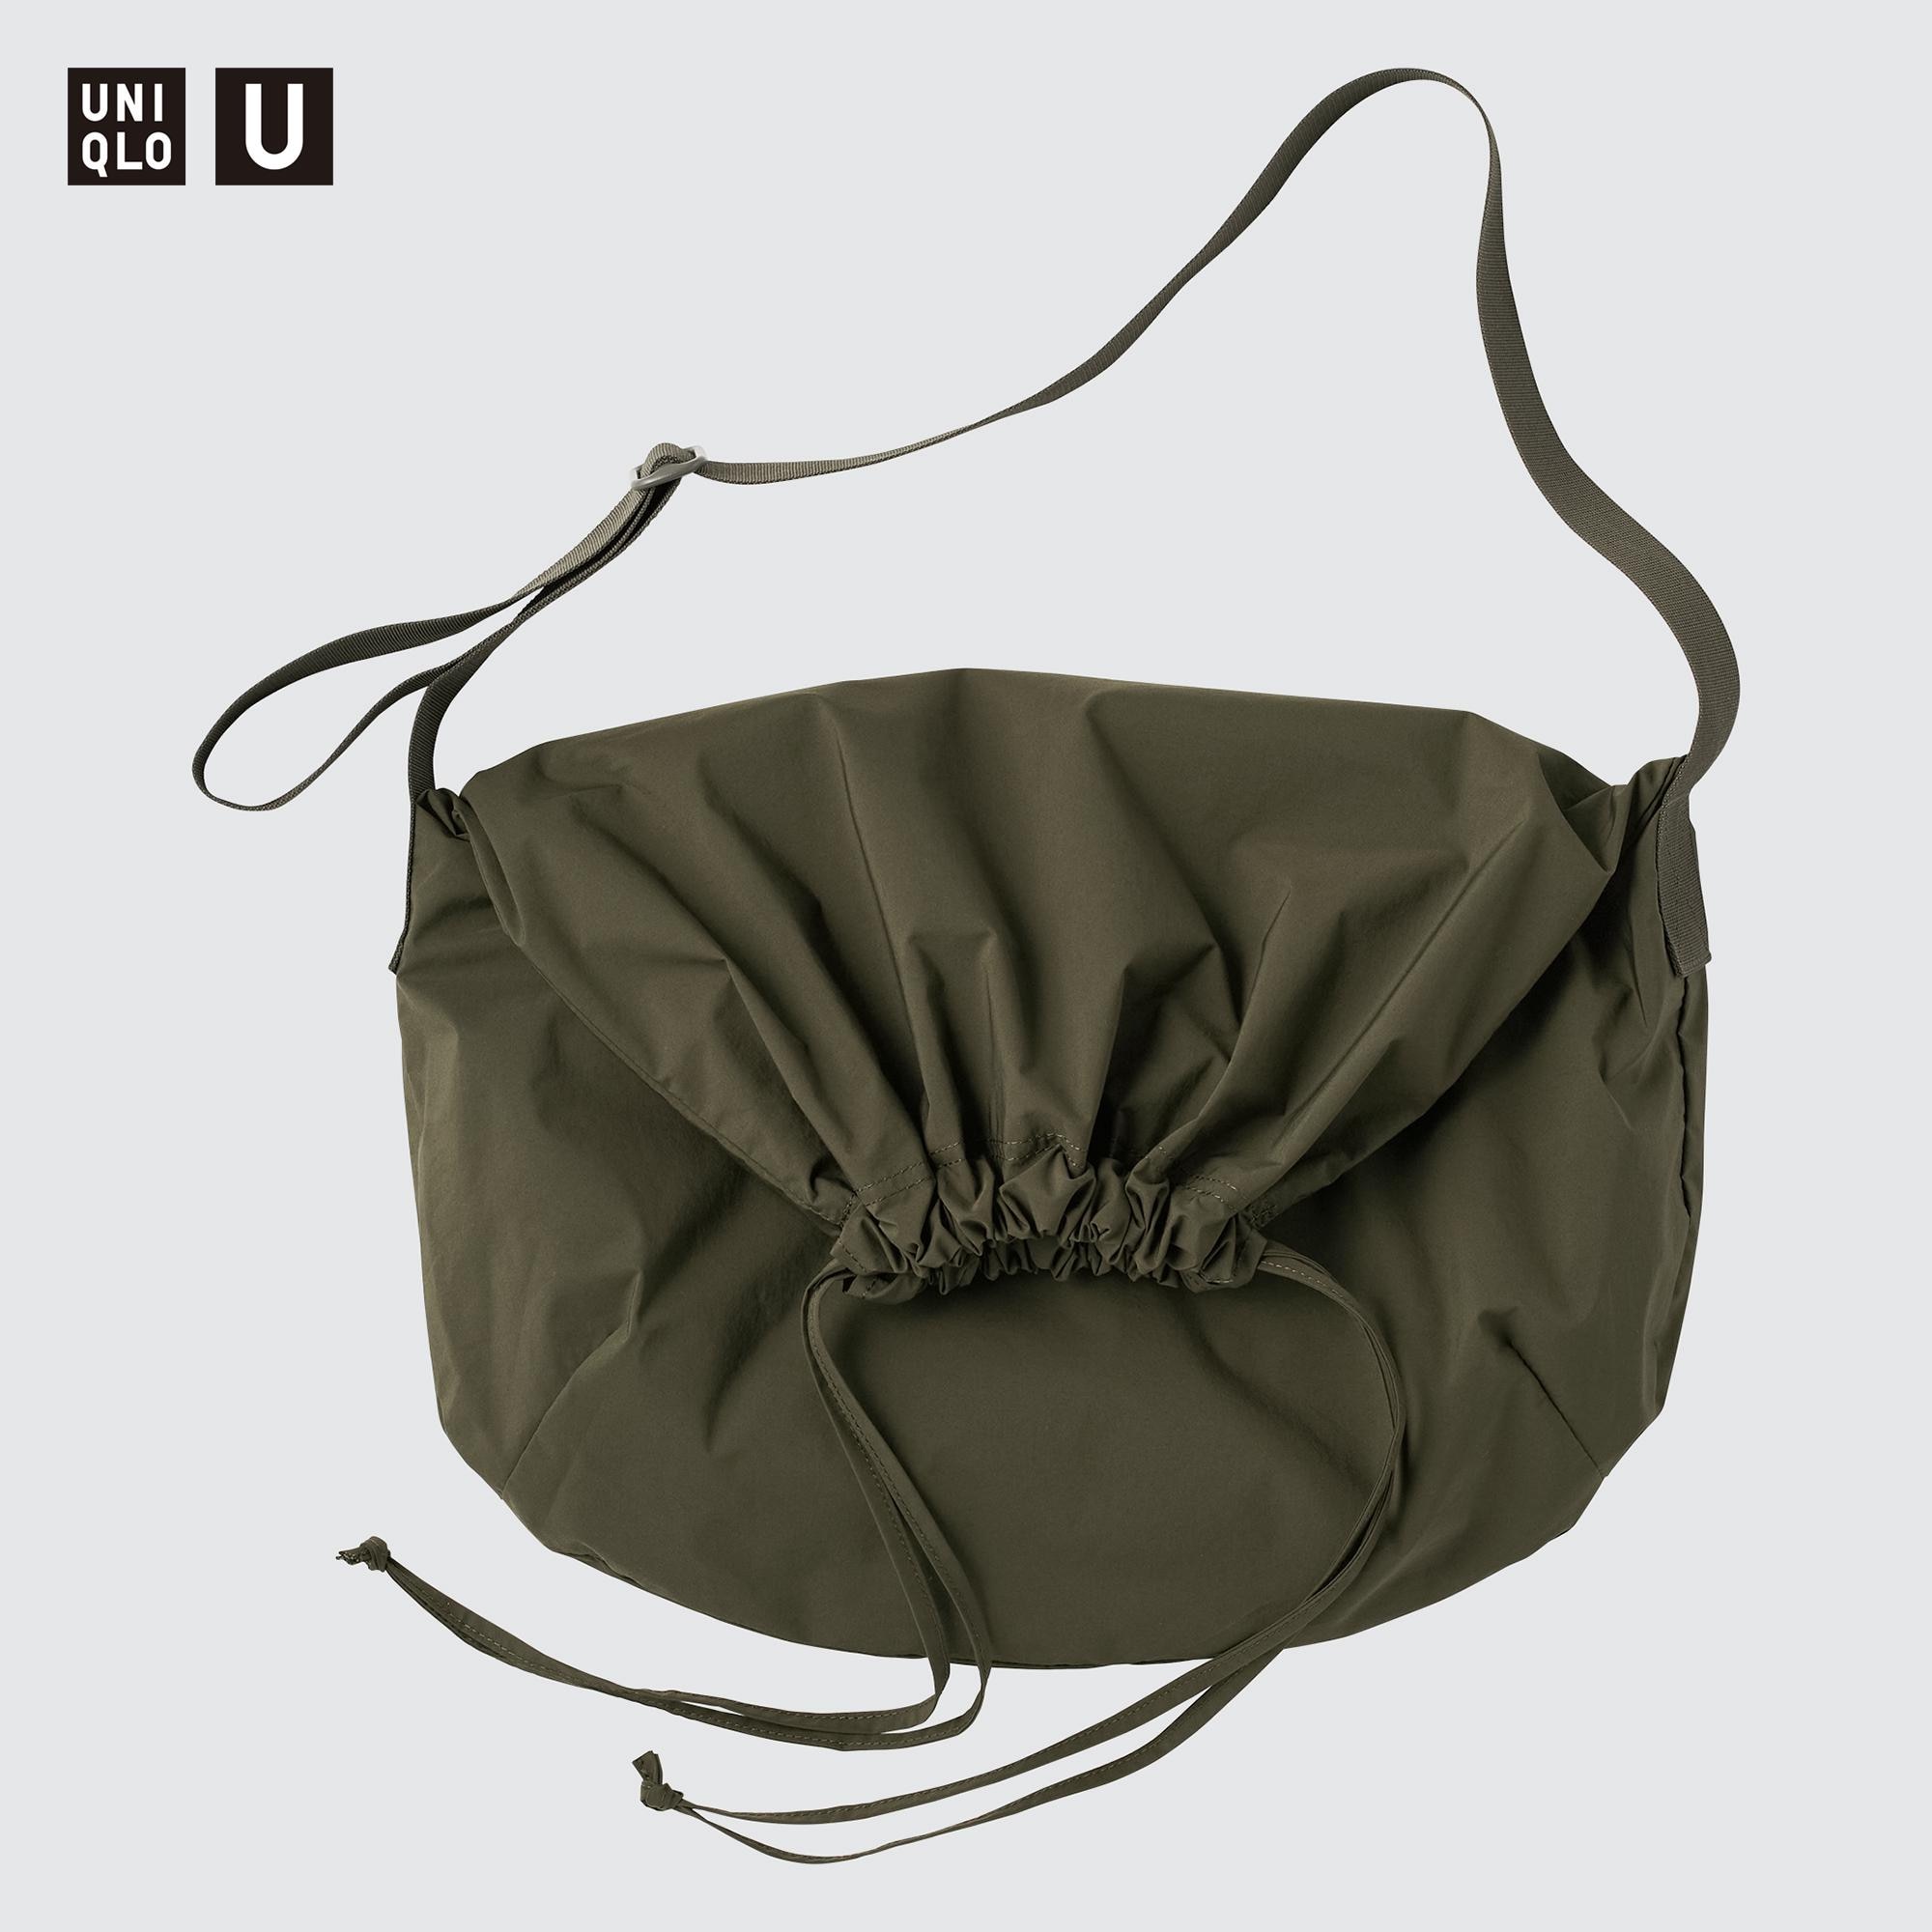 The Viral Uniqlo Moon Bag 25 Is Finally Available In Canada  Chatelaine